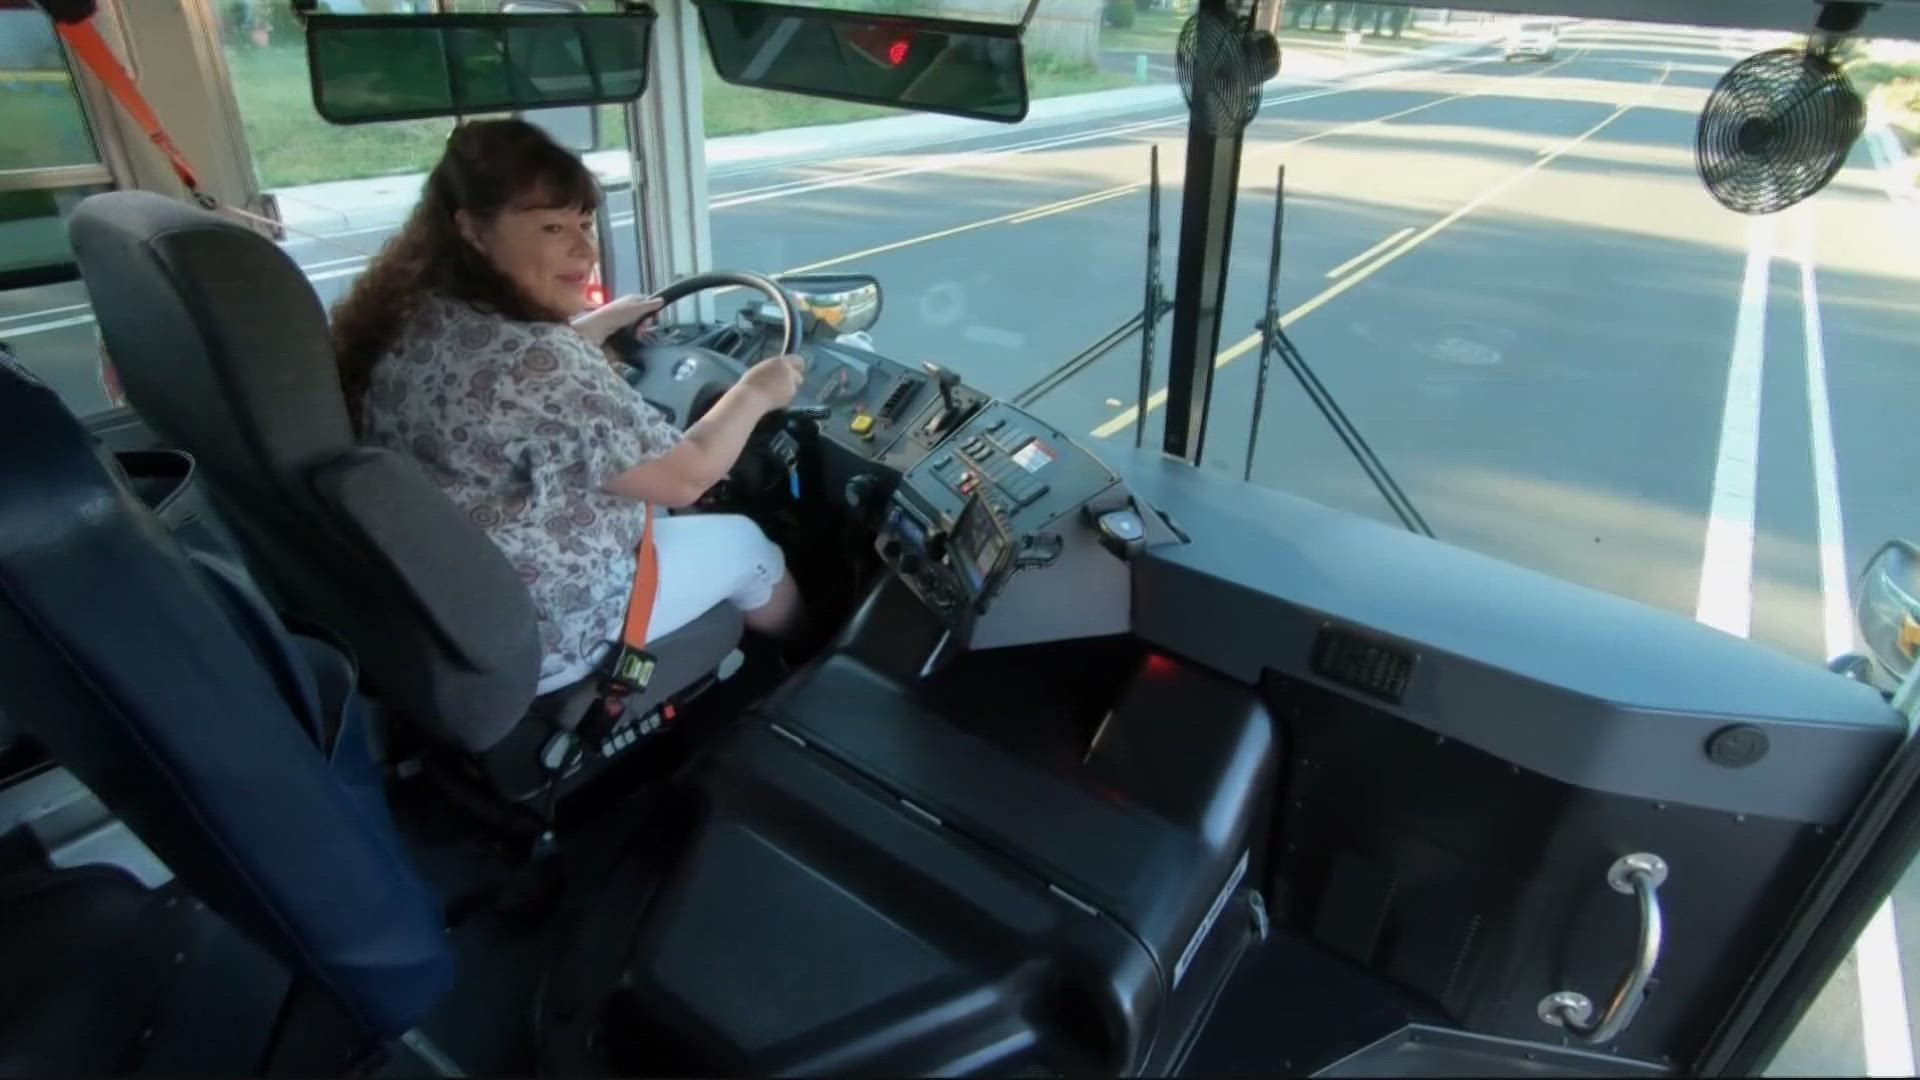 Many school districts across the country are experiencing a bus driver shortage, including the Beaverton School District. They've tried raising pay and benefits.